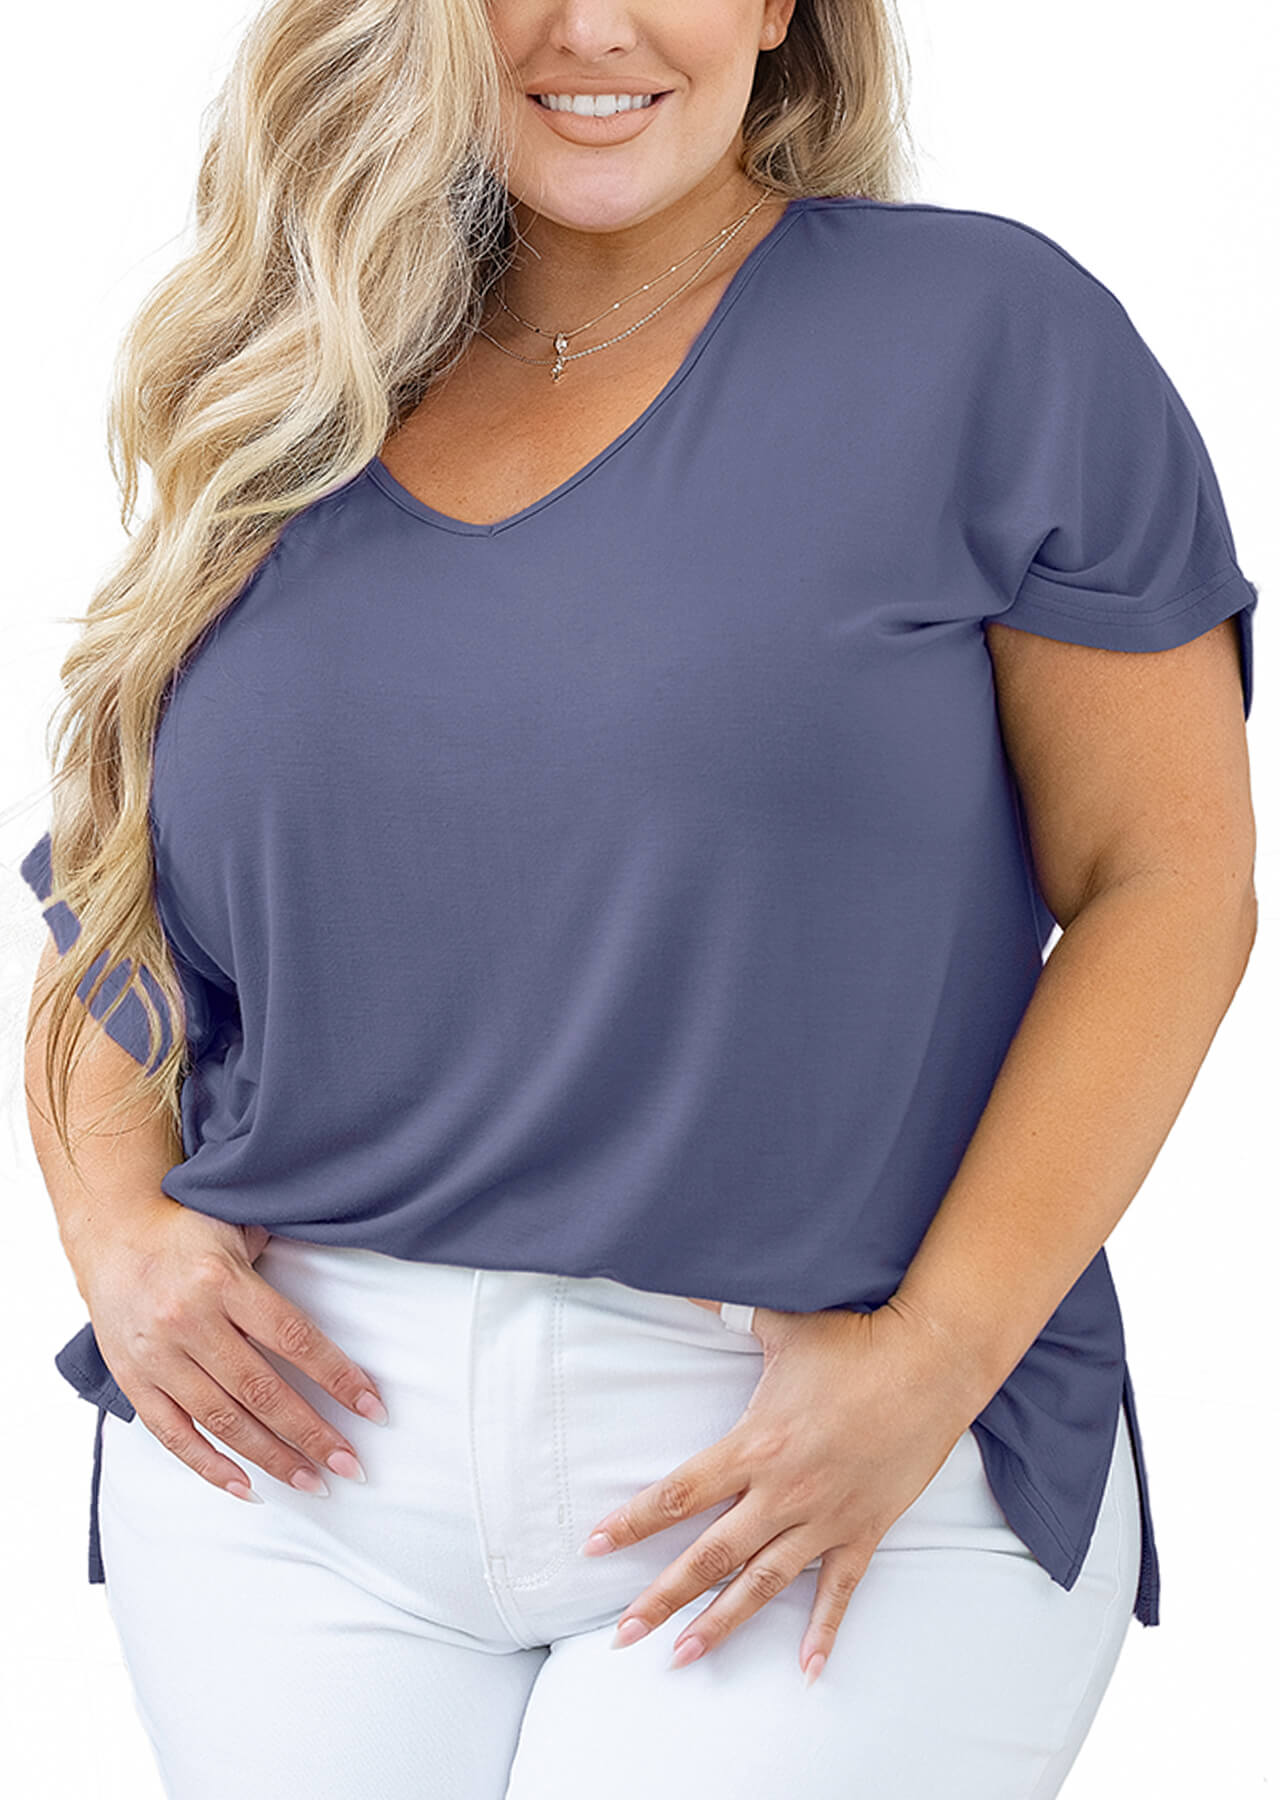 SHOWMALL Short Sleeve Plus Size T-shirt with Side Slit, V-Neck Summer Top -  Purple Grey / 1X